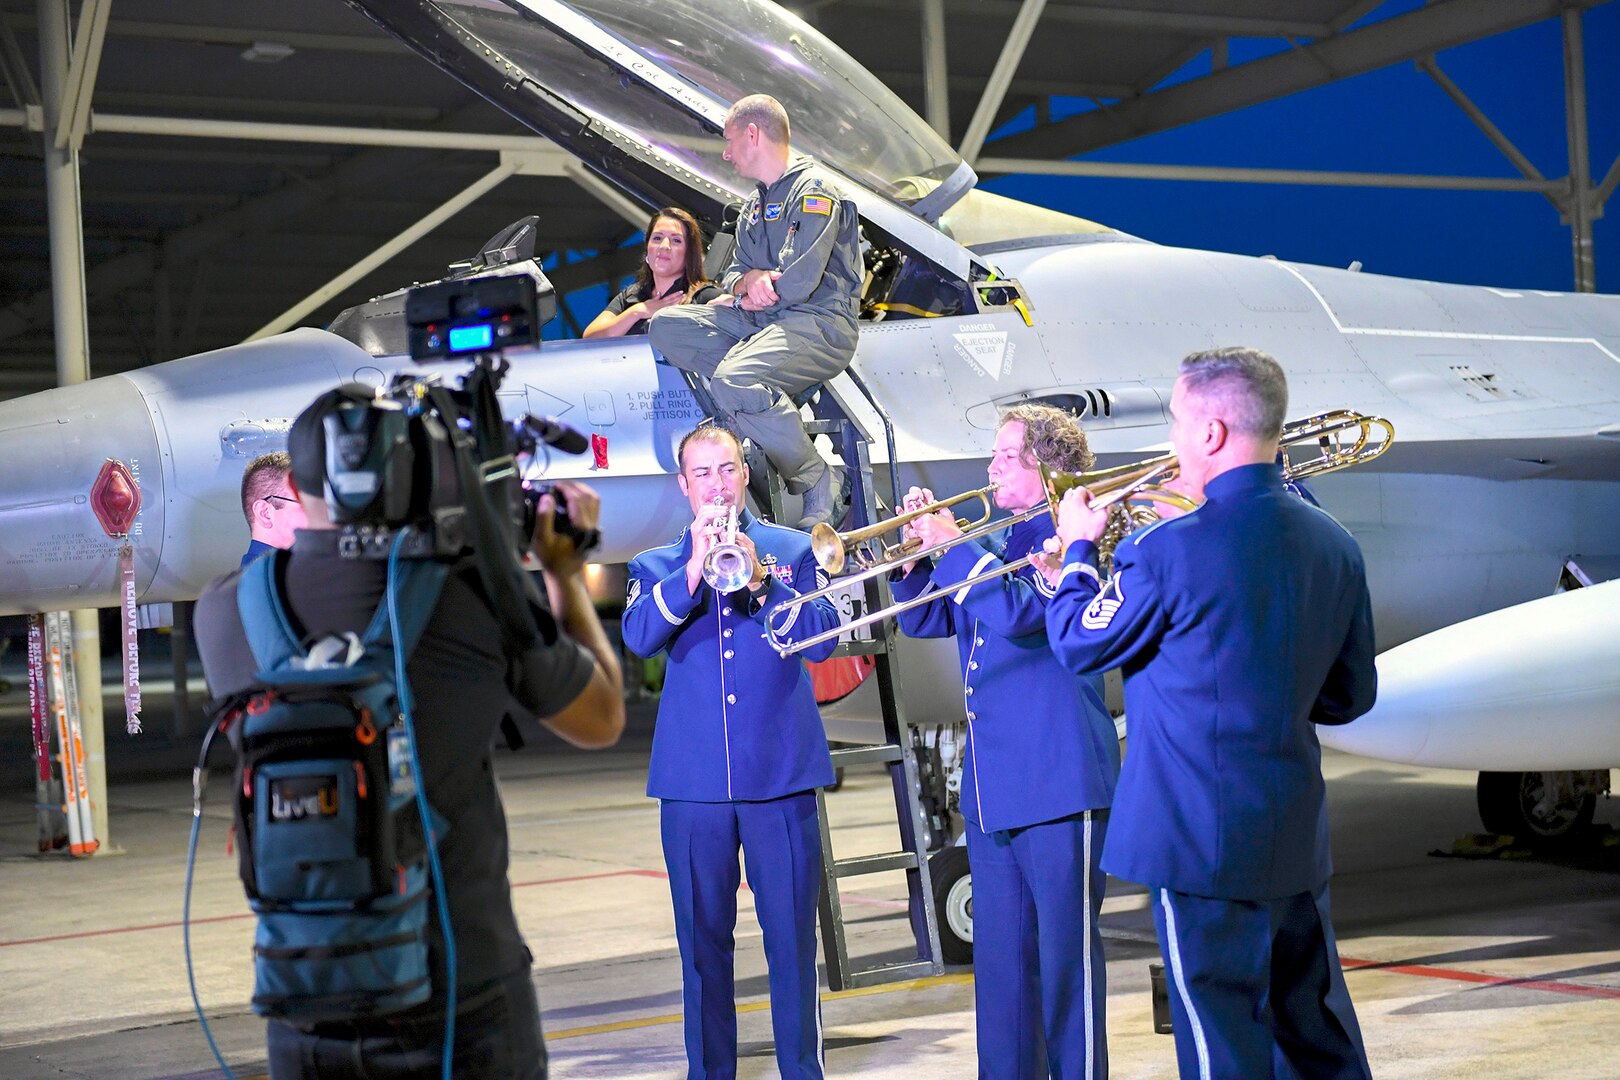 Members from United States Air Force Band of the West play in front of an F-16 Fighting Falcon, an aircraft assigned to the 149th Fighter Wing, while local weather reporter Jeannette Calle and 502nd Operations Support Squadron commander, Lt. Col. Benjamin Mather, talk in the background before the live broadcast at Joint Base San Antonio-Lackland Sept 18. Local weather reporters decided to conduct a live weather broadcast at the JBSA-Kelly Field Annex in honor of the Air Force’s 72nd birthday.